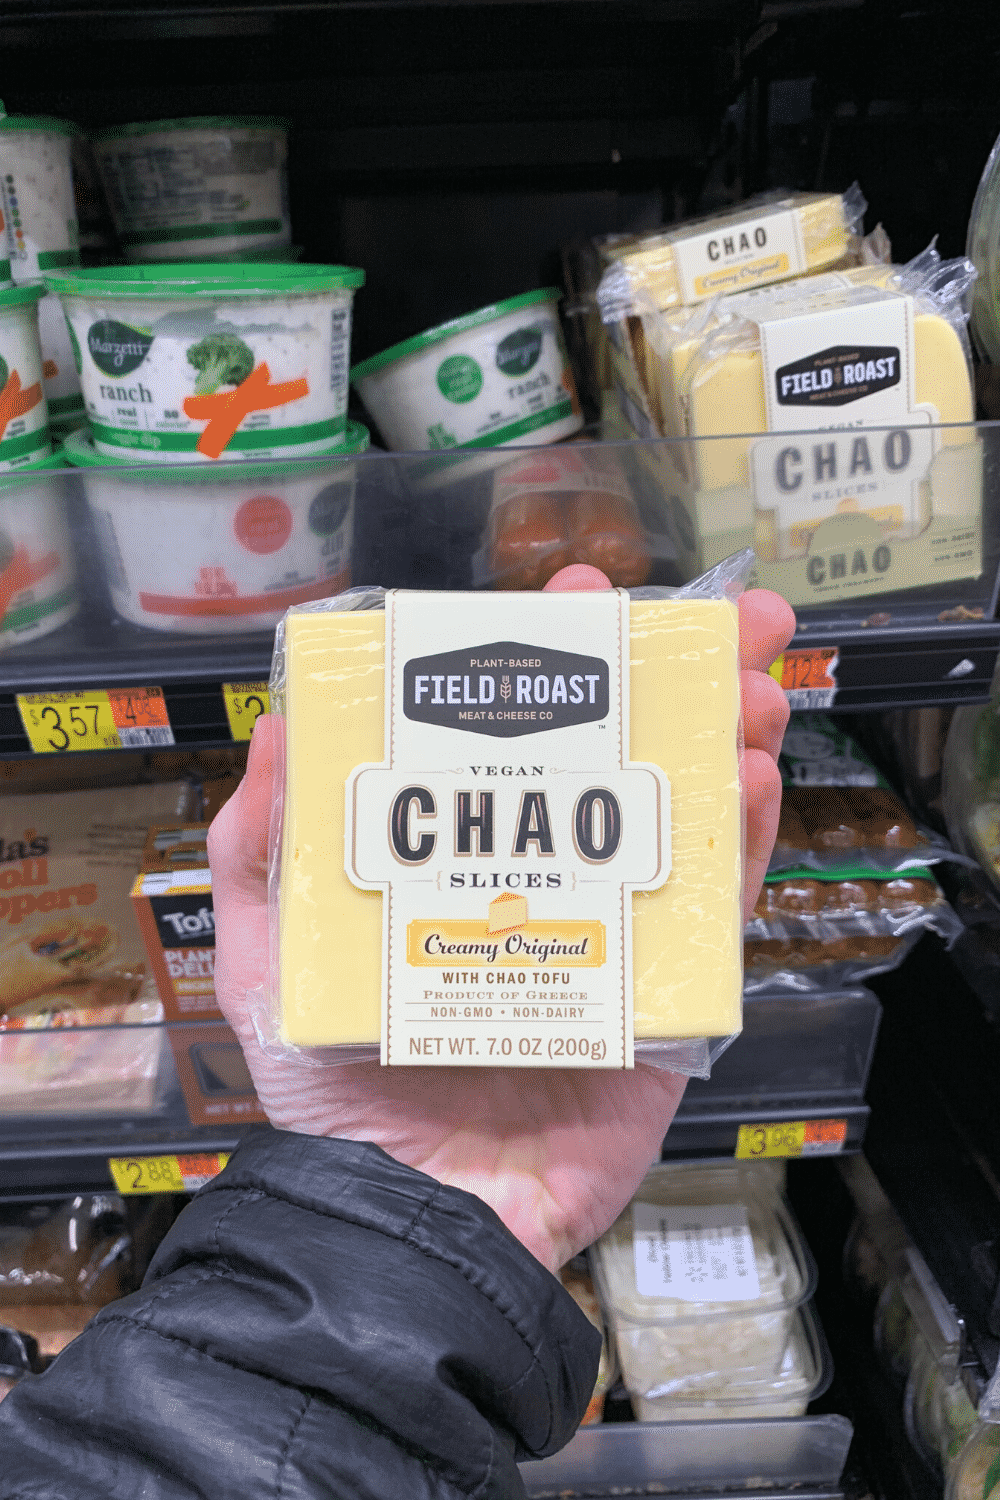 A hand holding plant-based field roast vegan chao slices creamy original with chao tofu.